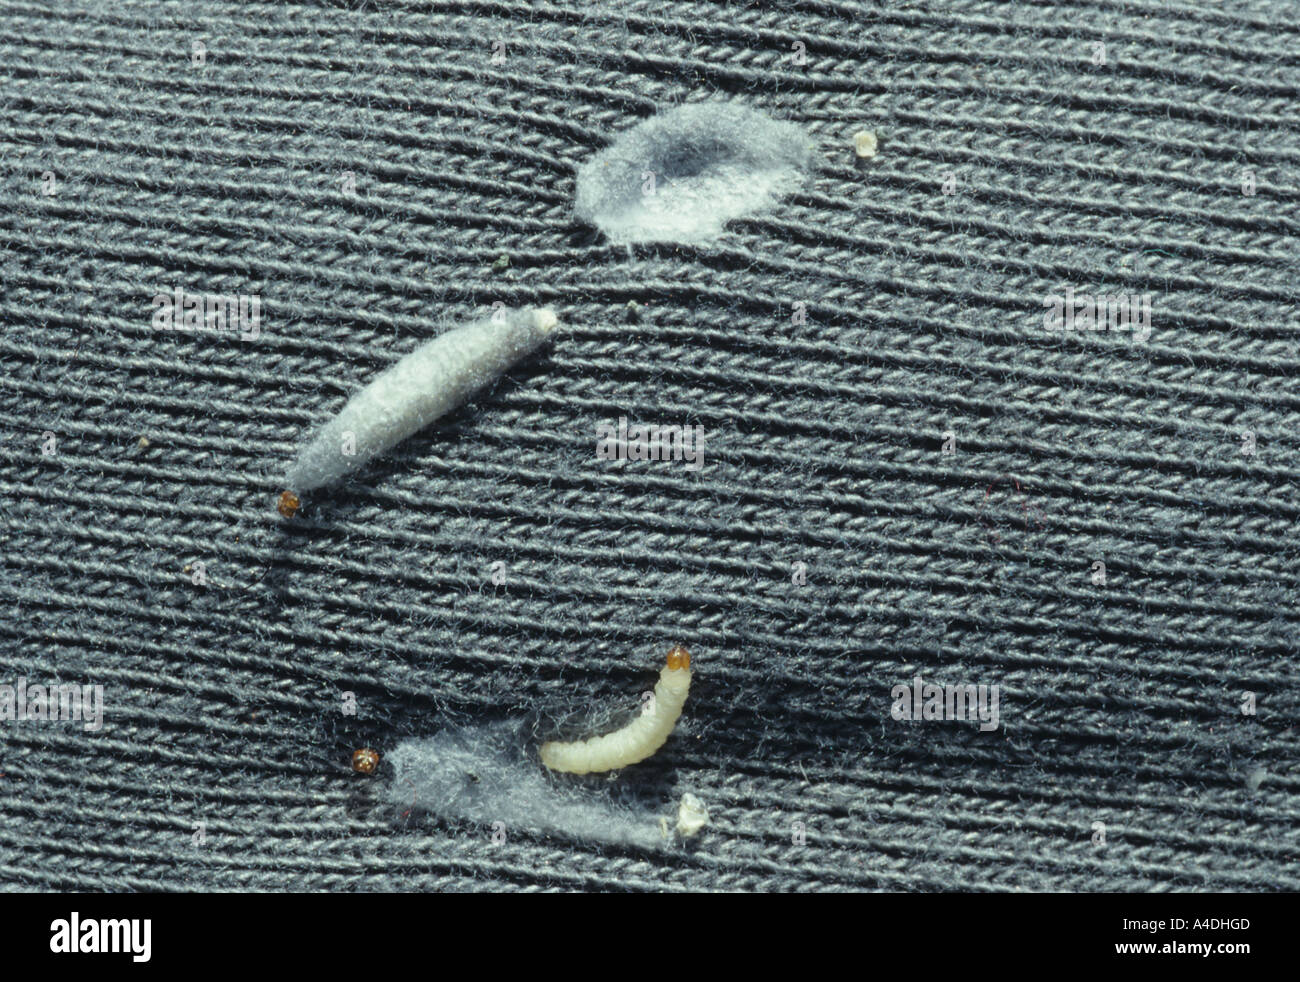 Clothes moth larvae, Tineola bisselliella, with silken cases attached to clothing. Stock Photo